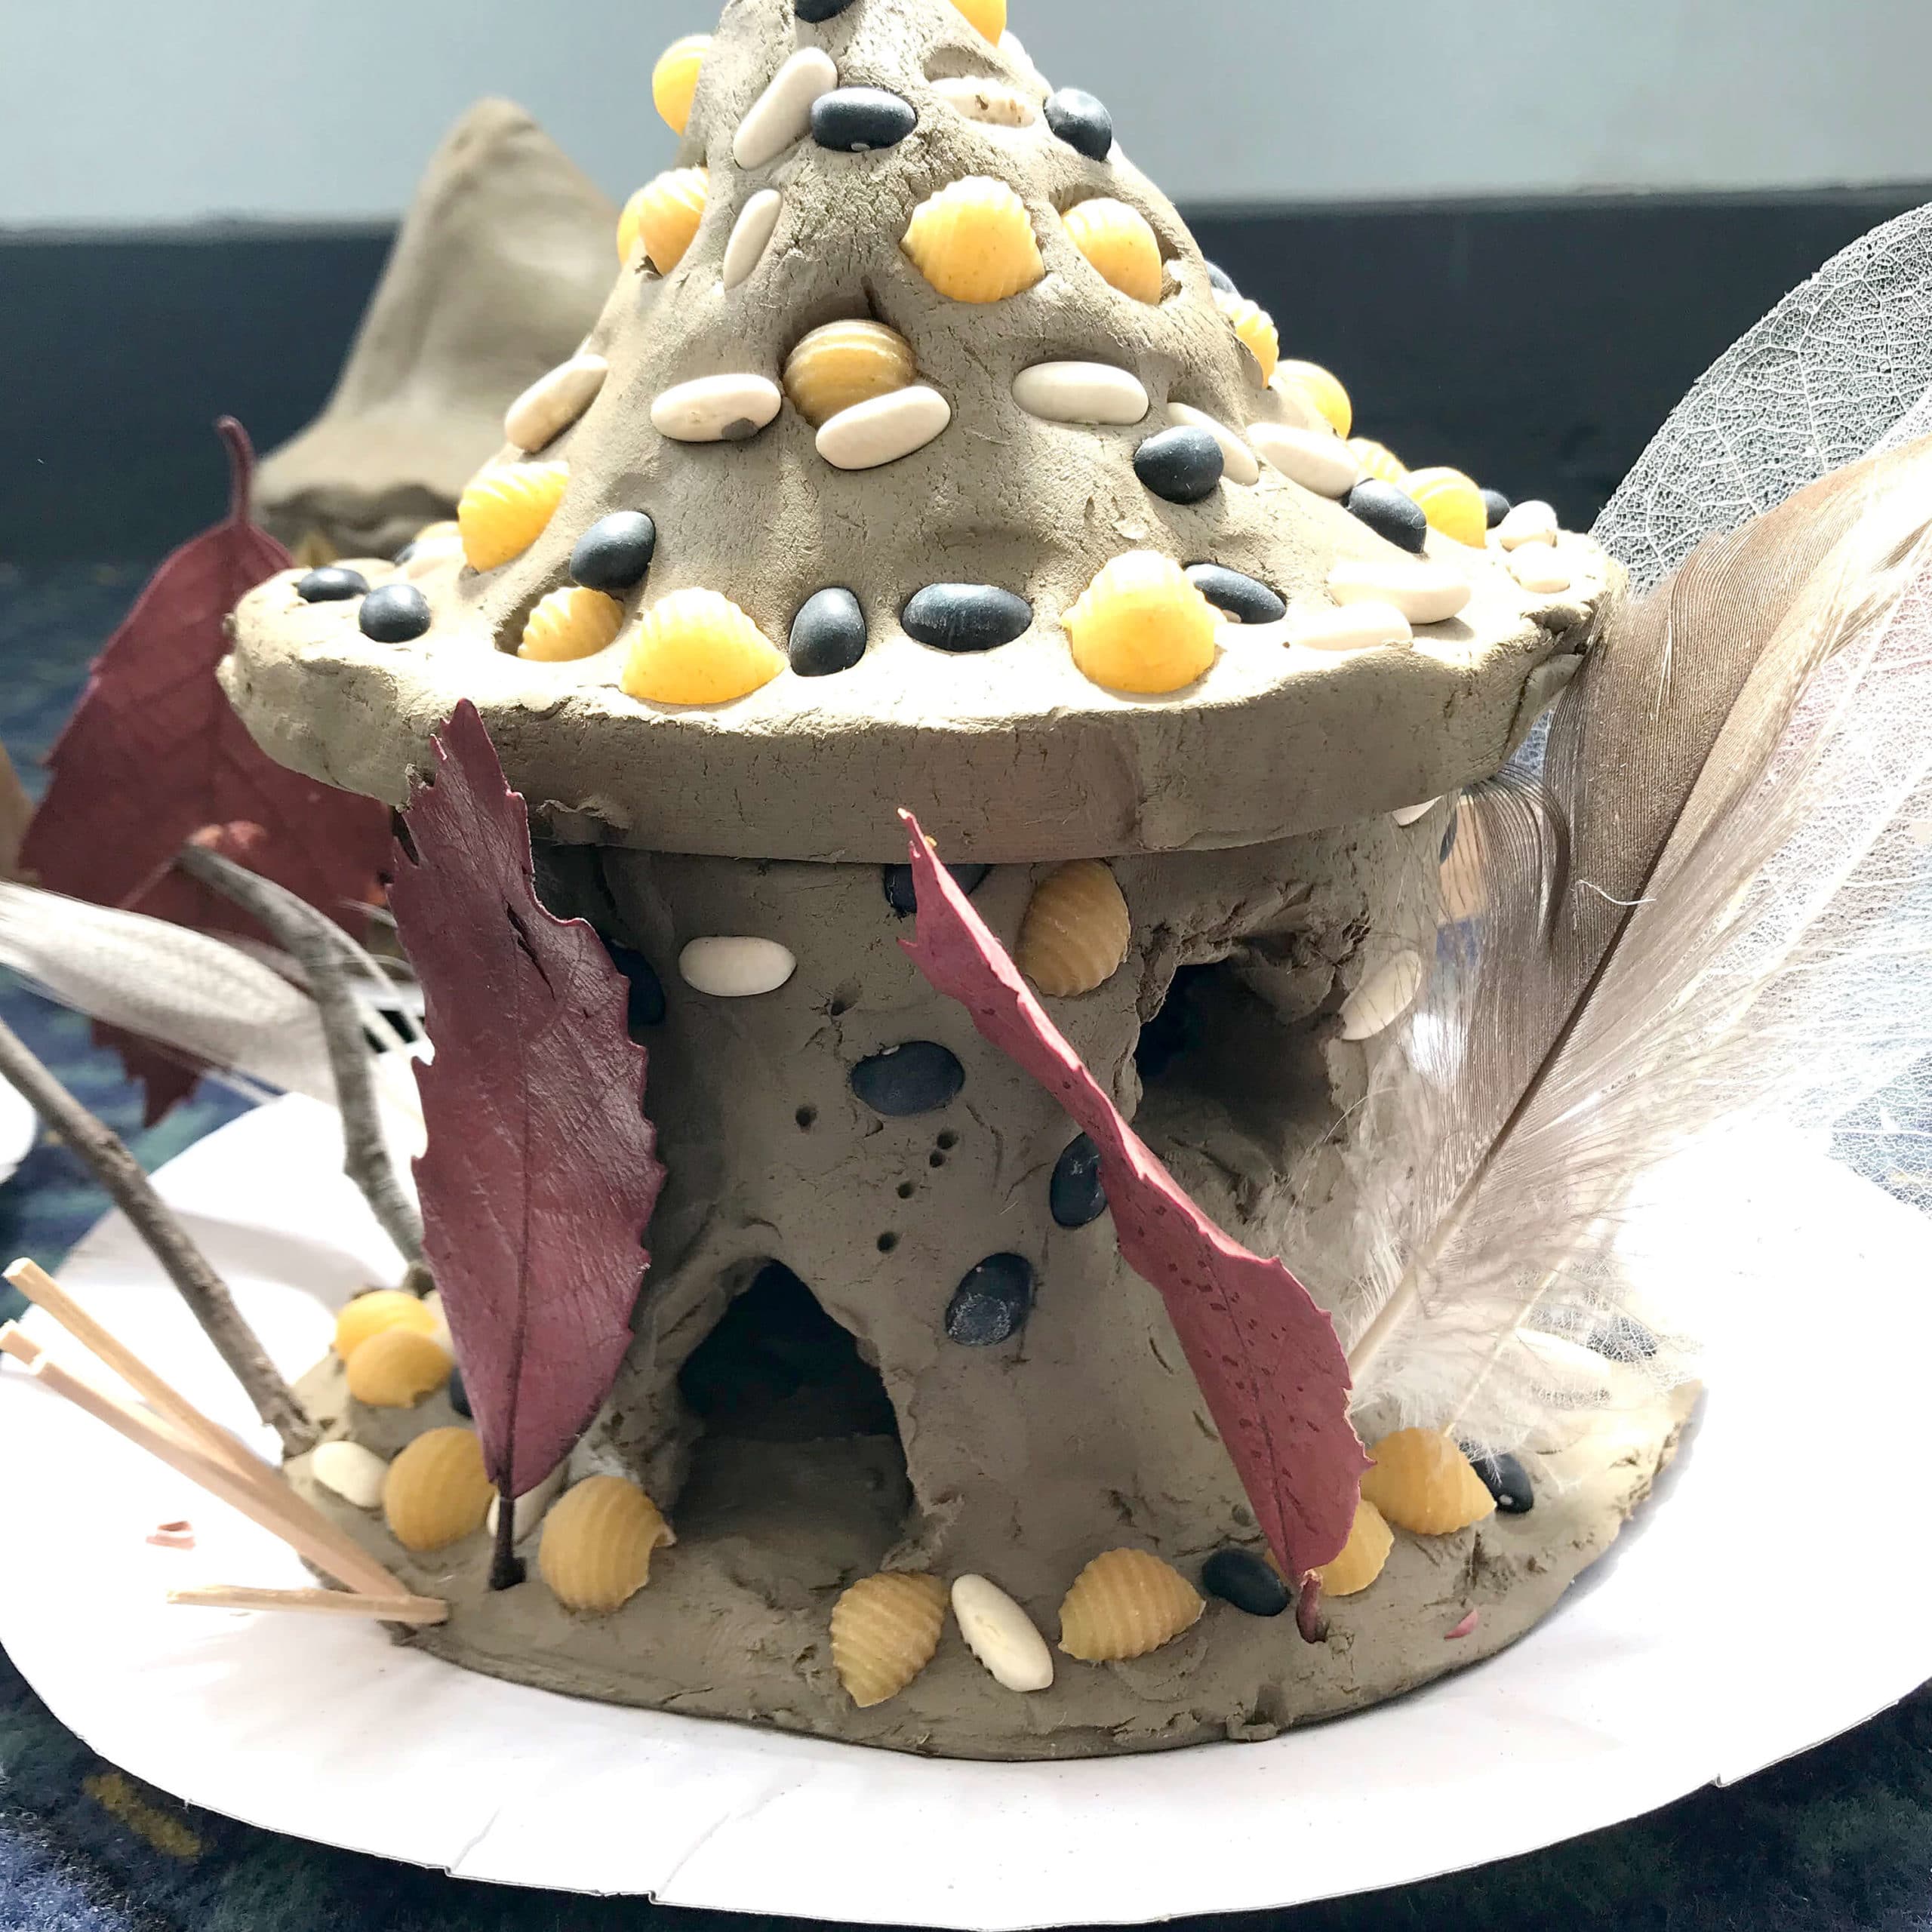 How to make a fairy house with clay, beans, and pasta